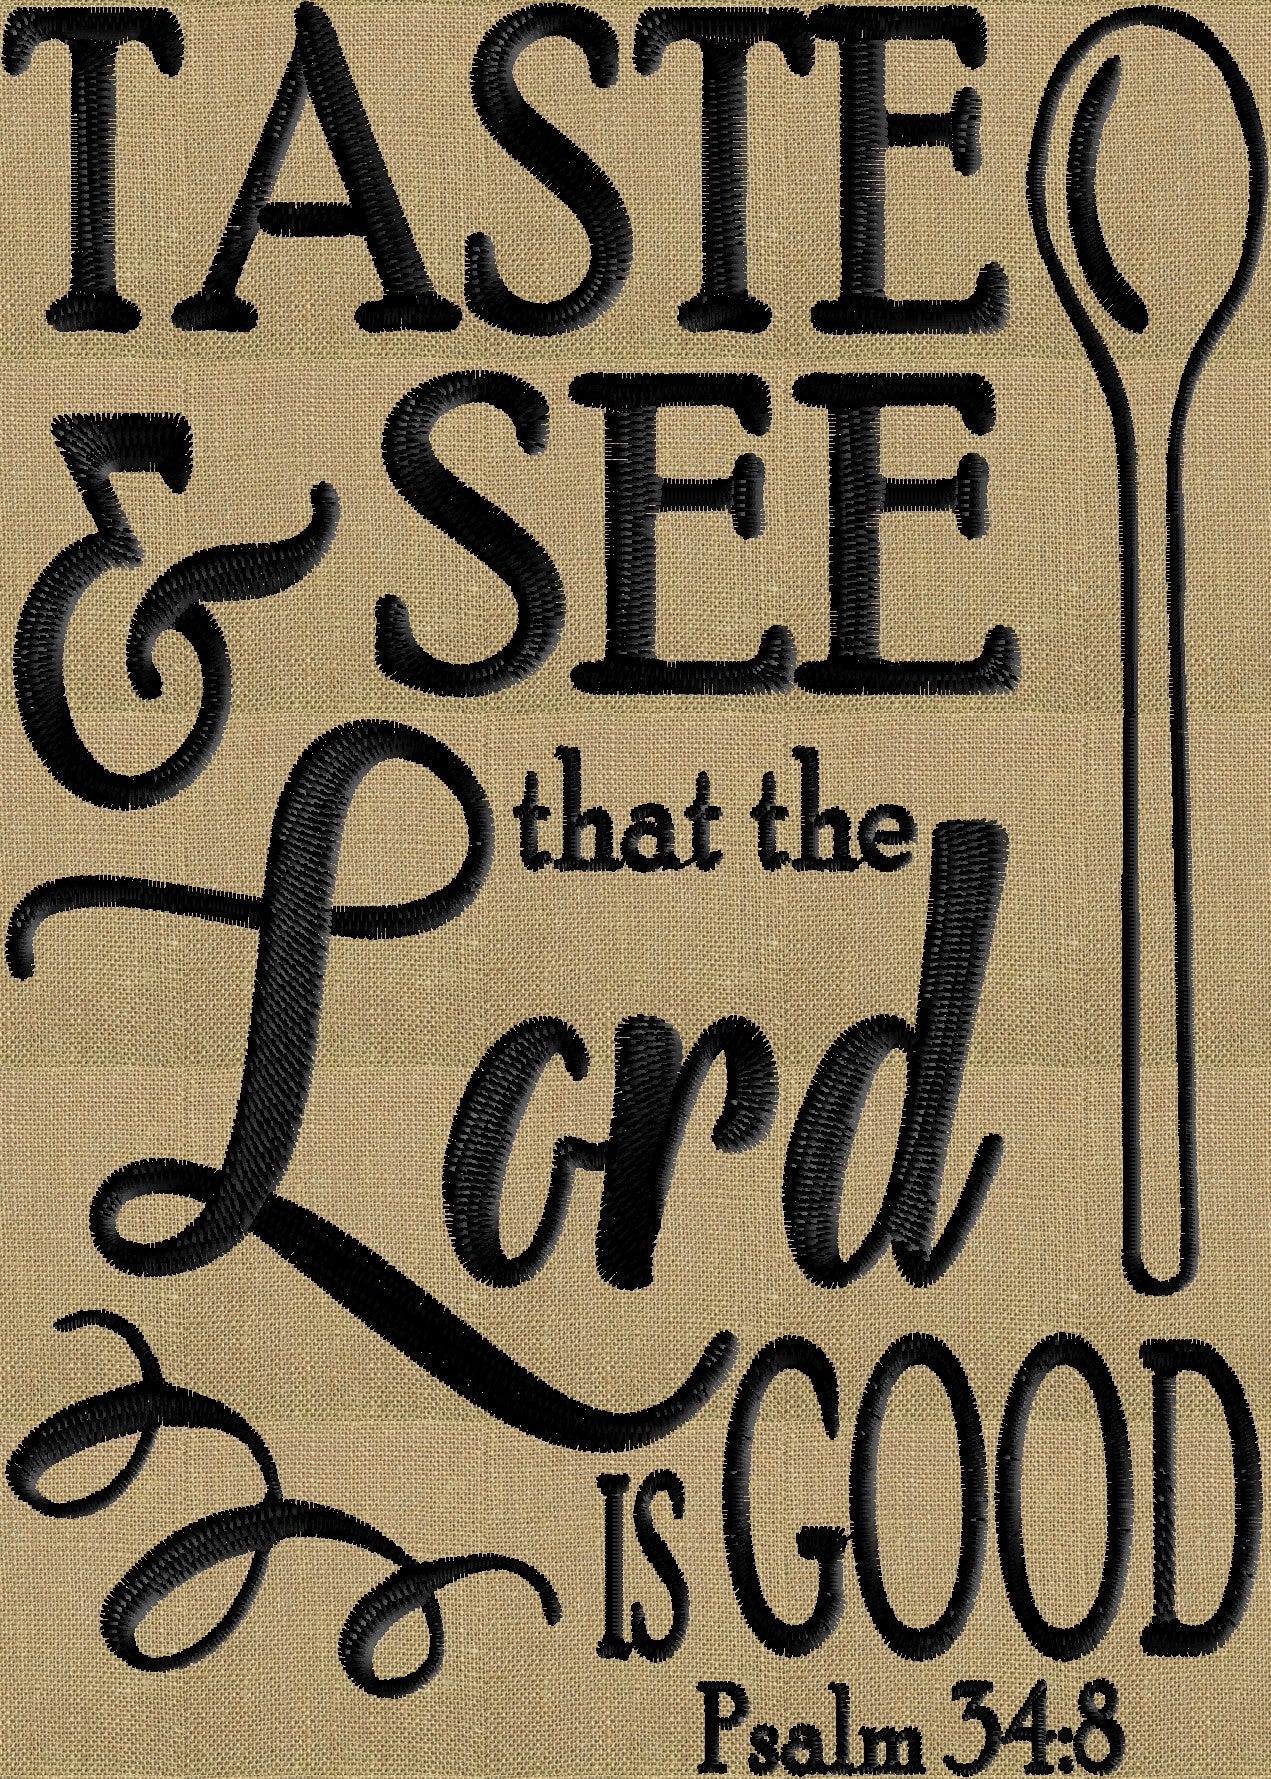 Taste and See... Psalm quote - EMBROIDERY DESIGN FILE- Instant download - Exp Jef Vp3 Pes Dst formats - 2 sizes 1 color